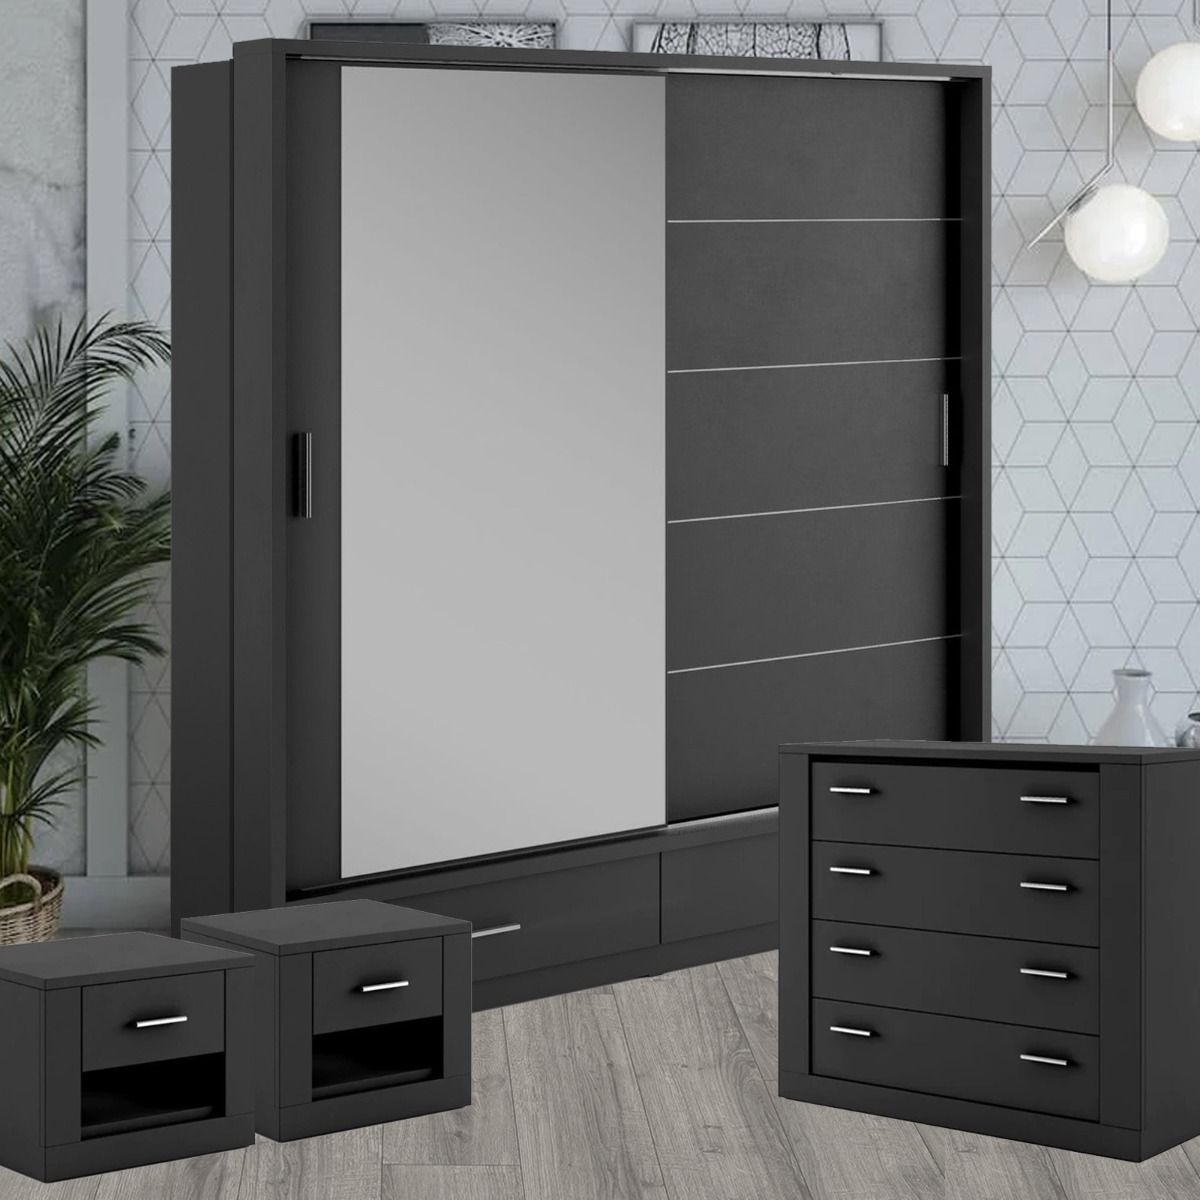 Bedroom Furniture Sets On Sale | Wardrobe Direct™ In Black And White Wardrobes Set (Gallery 5 of 20)